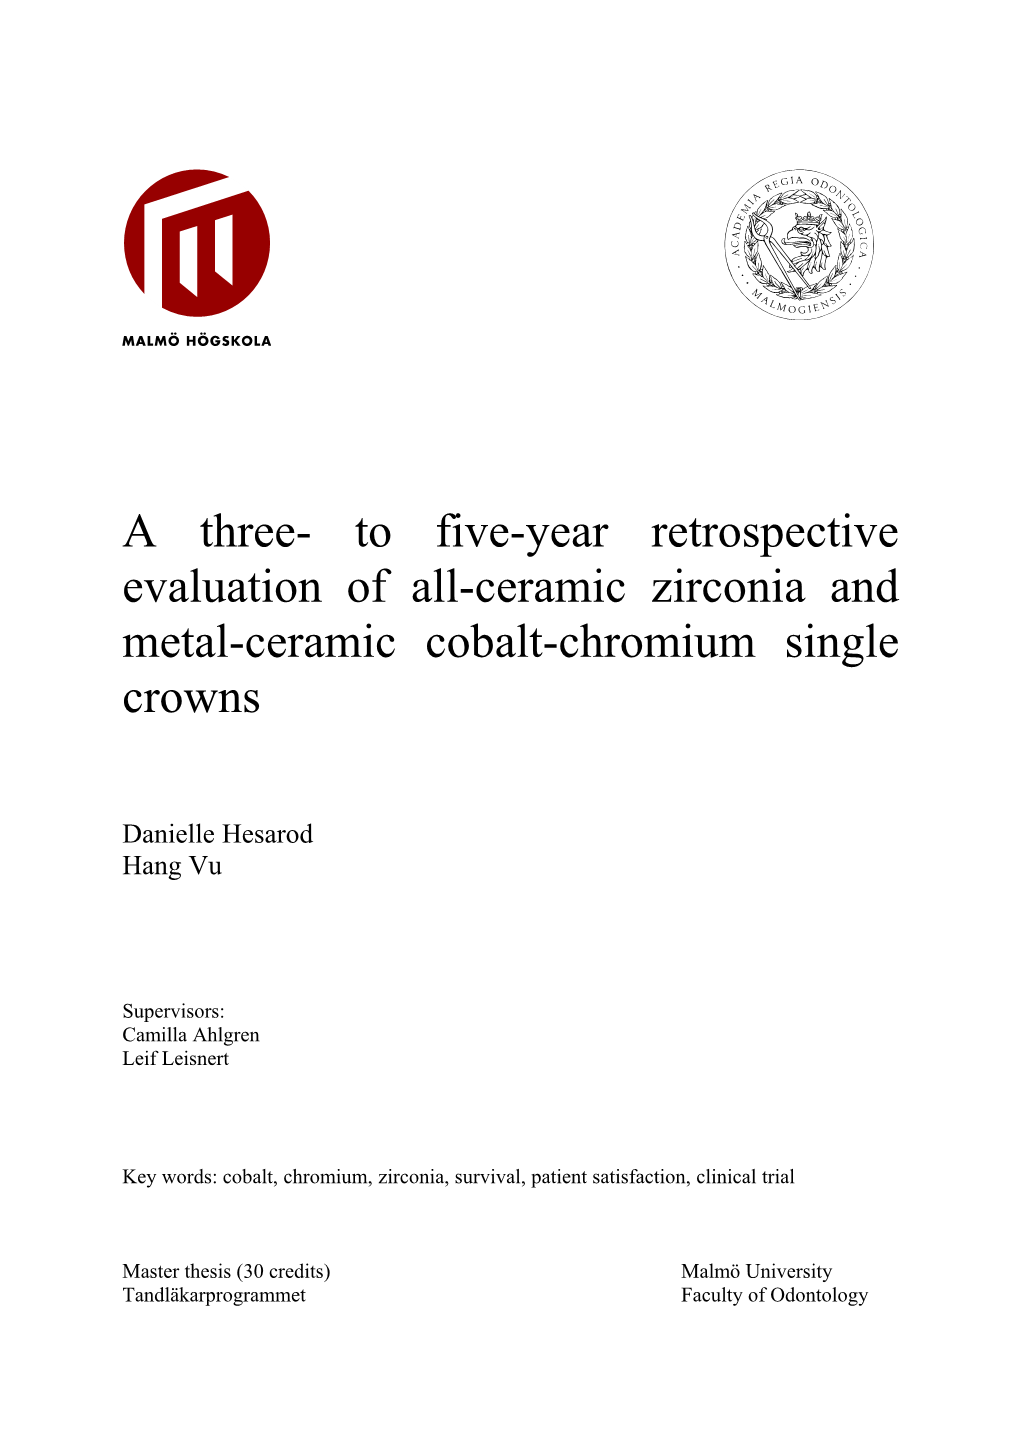 A Three- to Five-Year Retrospective Evaluation of All-Ceramic Zirconia and Metal-Ceramic